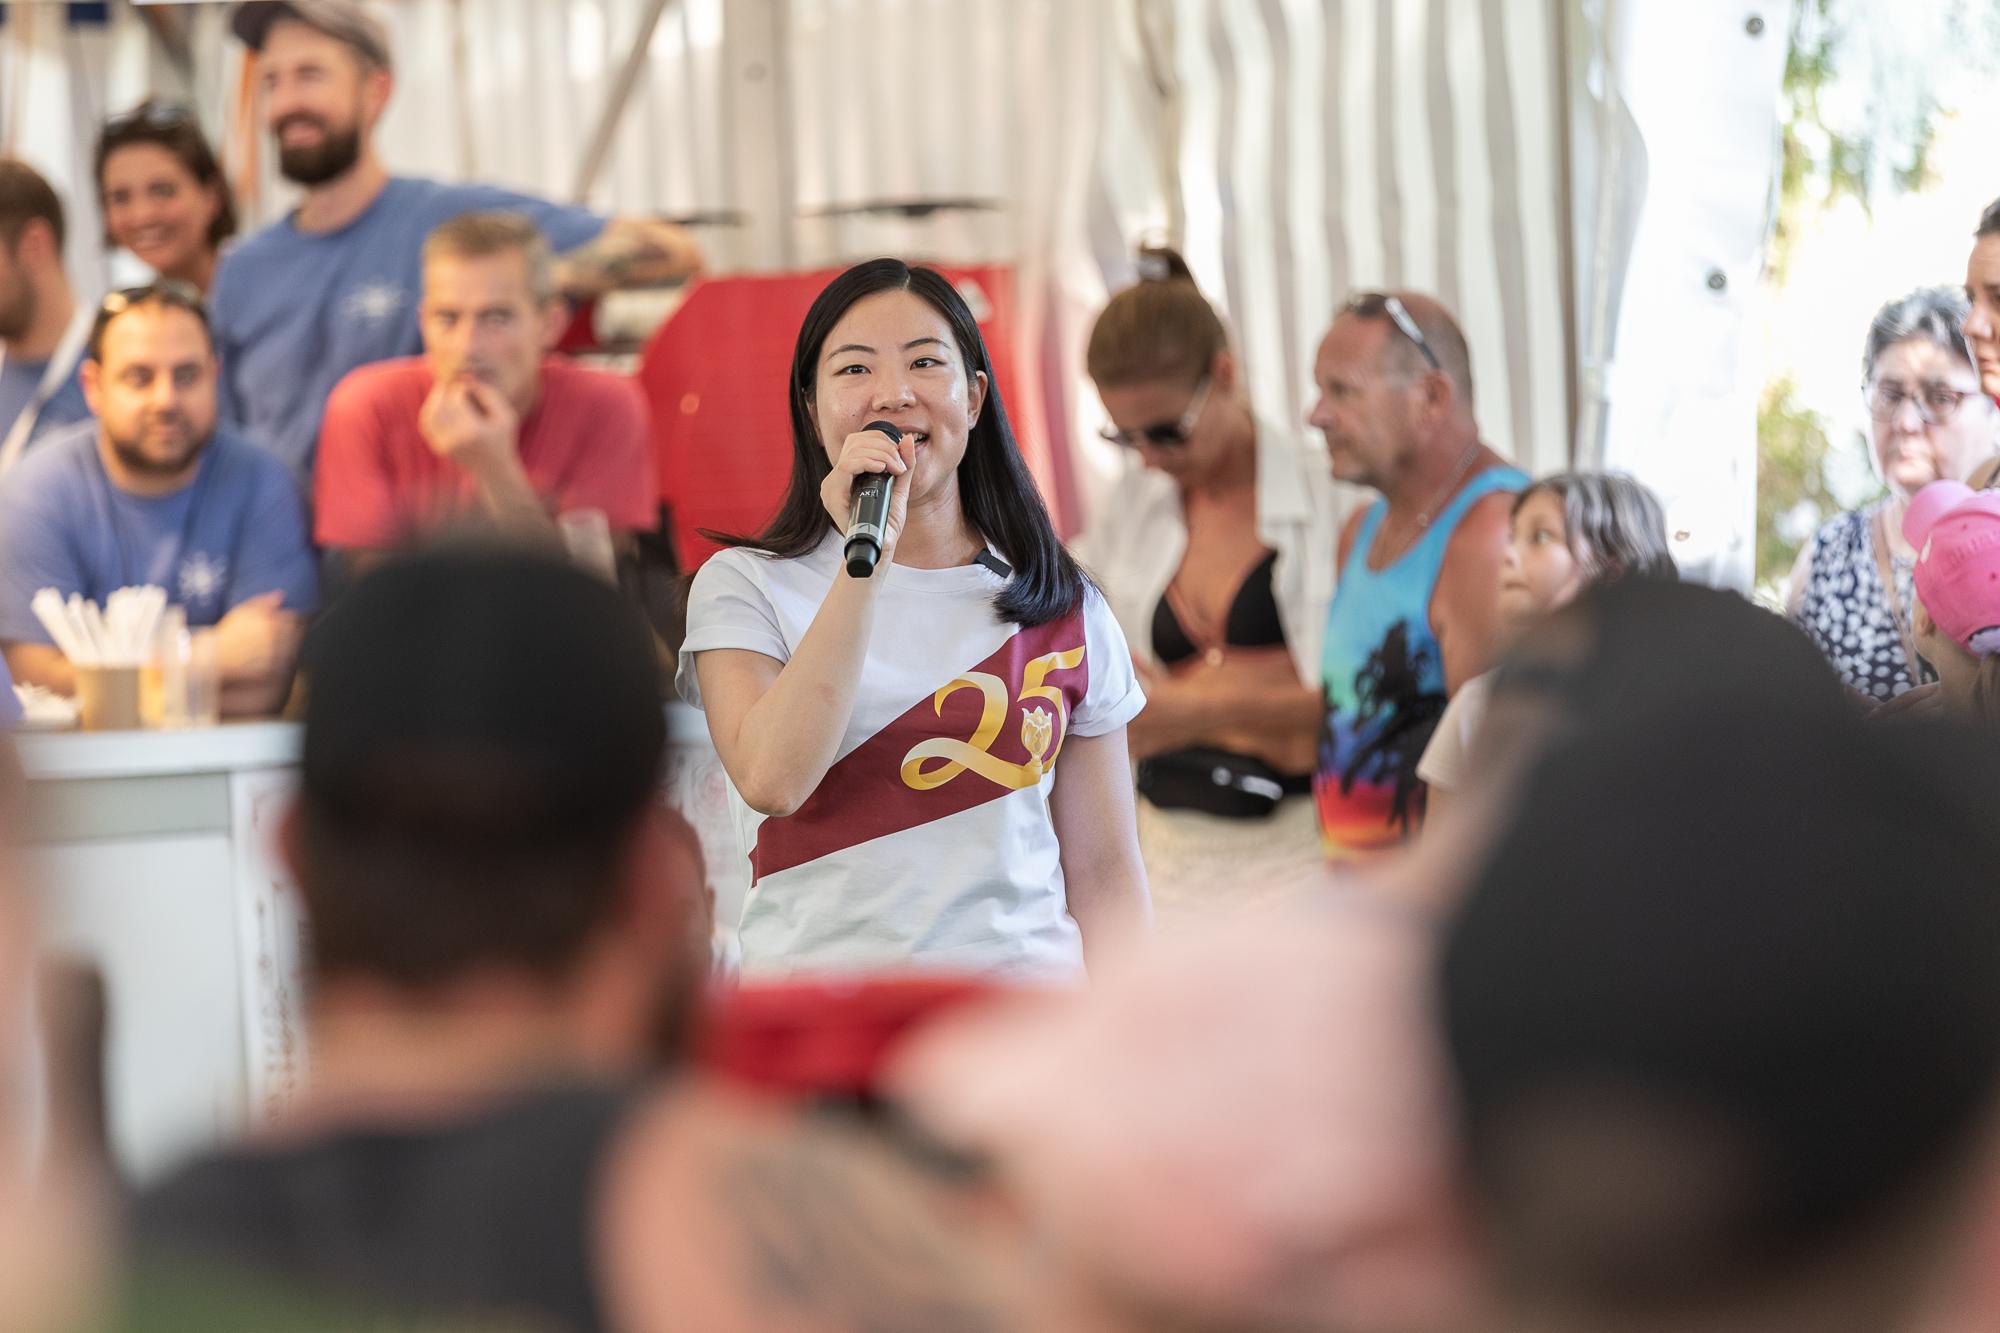 The Deputy Director of  the Hong Kong Economic and Trade Office, Berlin, Ms Bonnie Ka, speaks at the prize presentation ceremony of the dragon boat race in Eglisau, Switzerland, on June 26 (Swiss time).